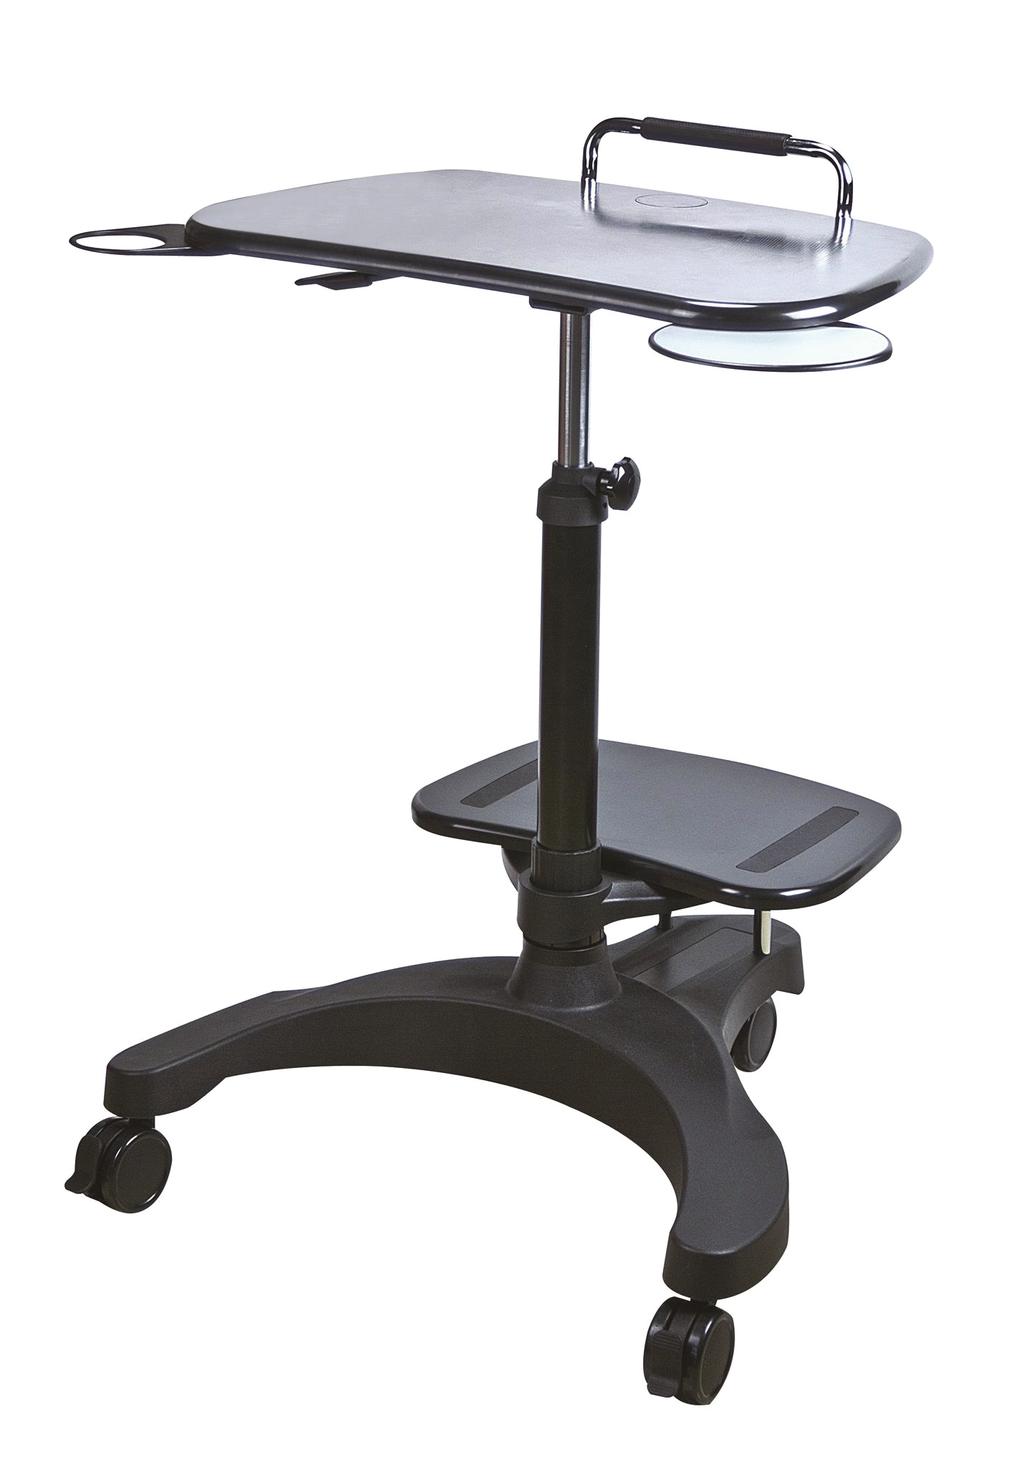 Trak Mobile Notebook Cart Sitting / Standing Mobile Notebook Desk Effortlessly moves the Notebook cart to the point of need, securely holding a laptop for comfortable data entry.